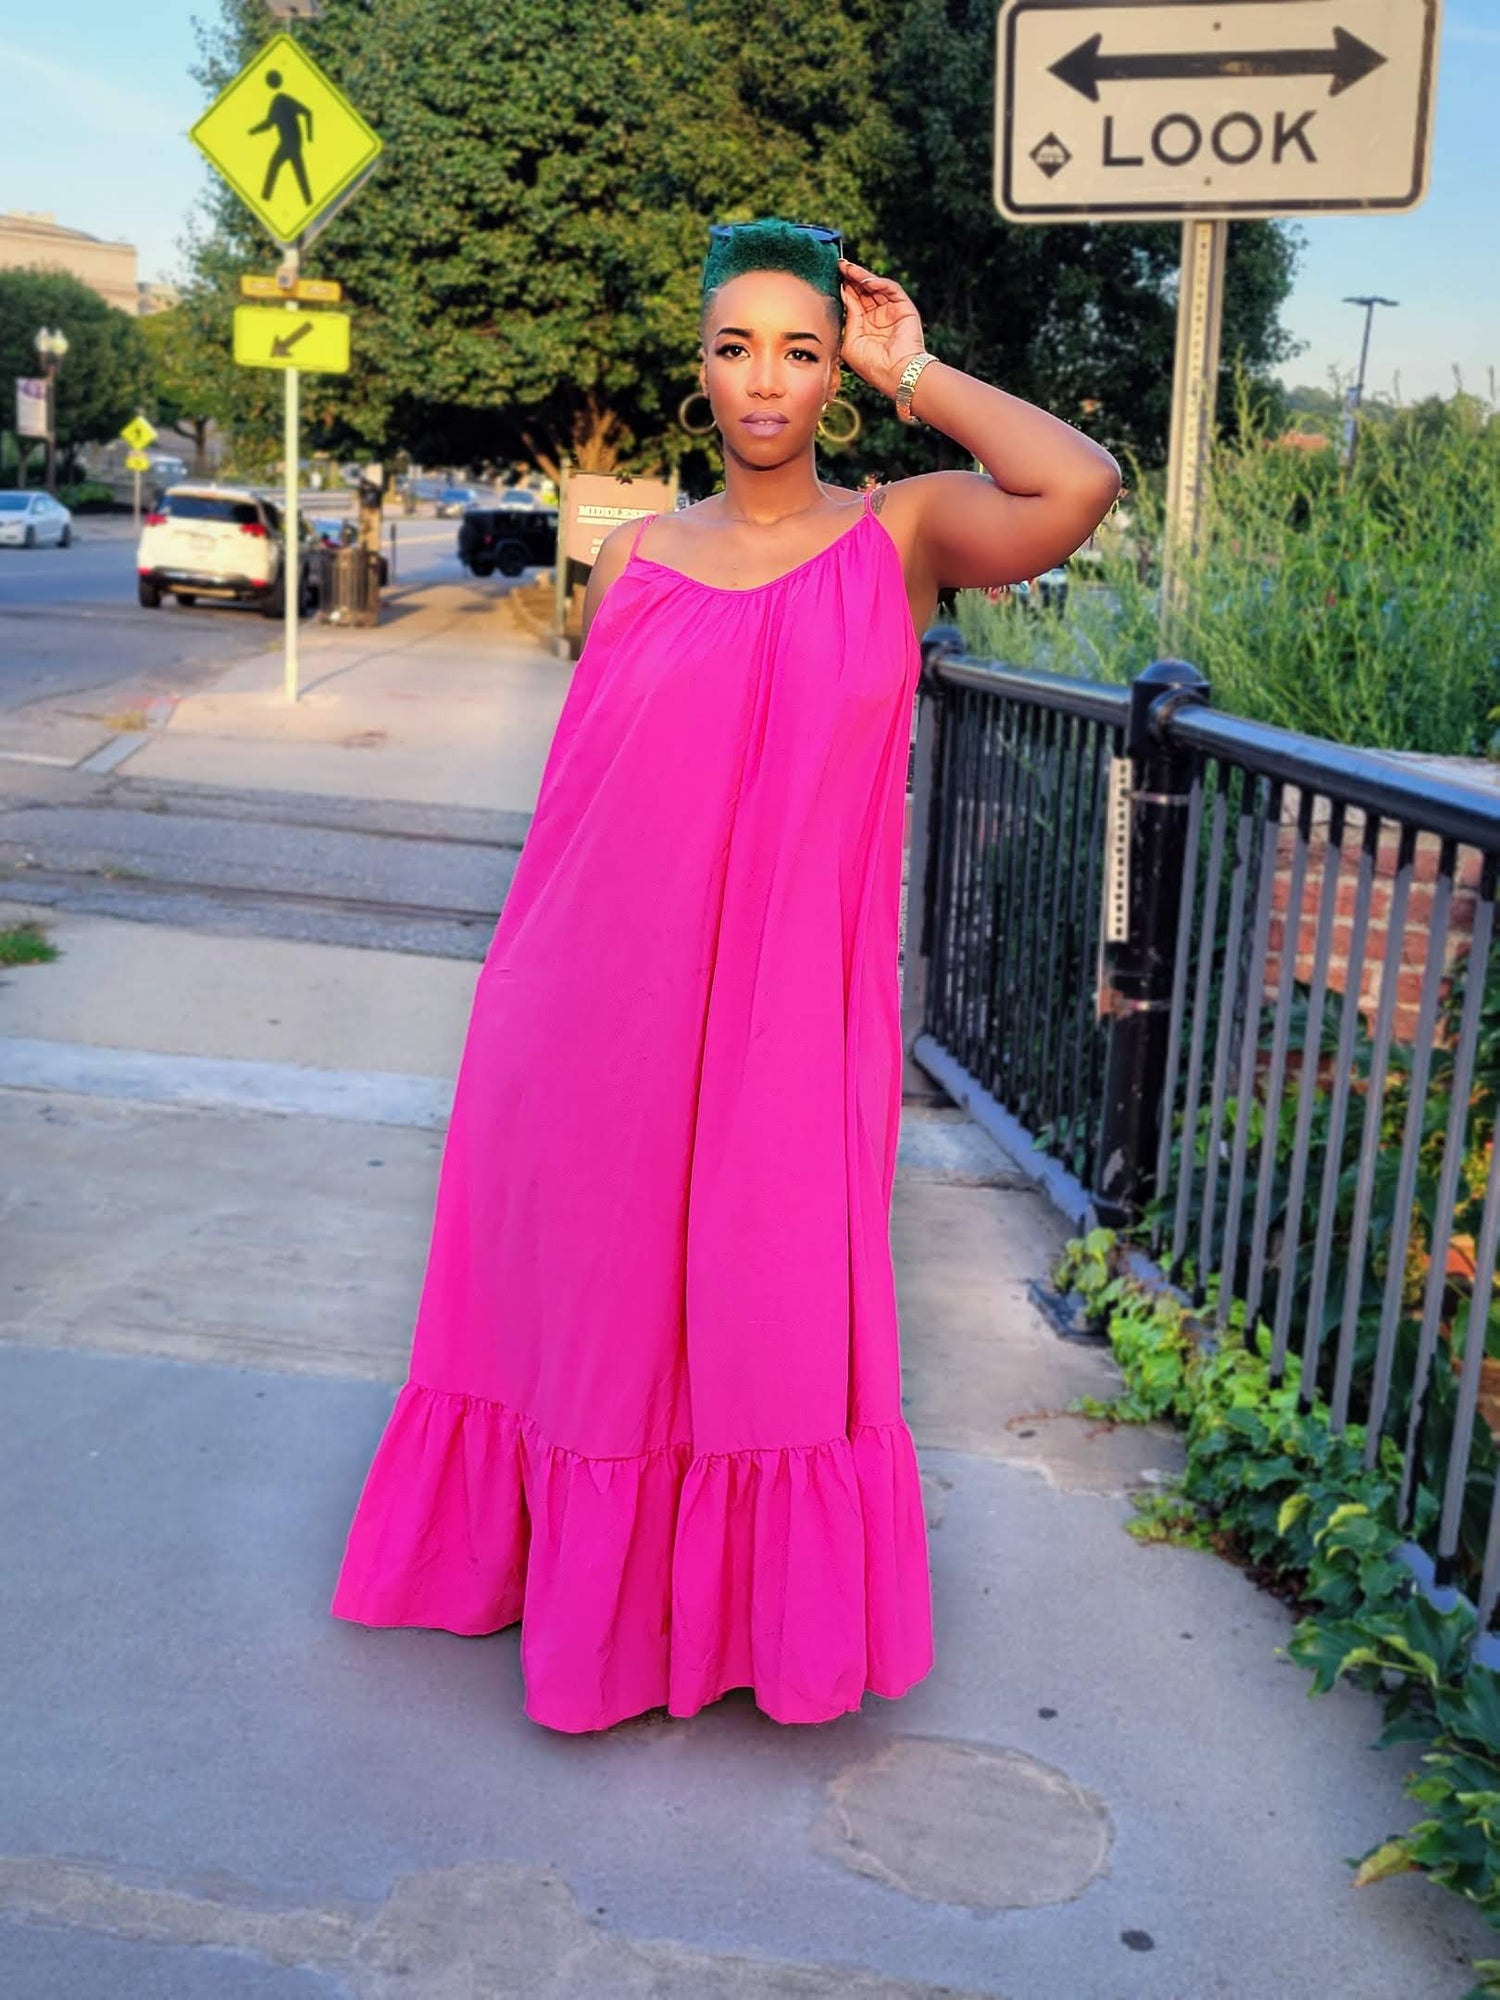 flamingo pink maxi-dress lovely ruched 3/4 floor touching dress. adjustable bra straps, model sports green mohawk hair with gold accessories' that completes the look